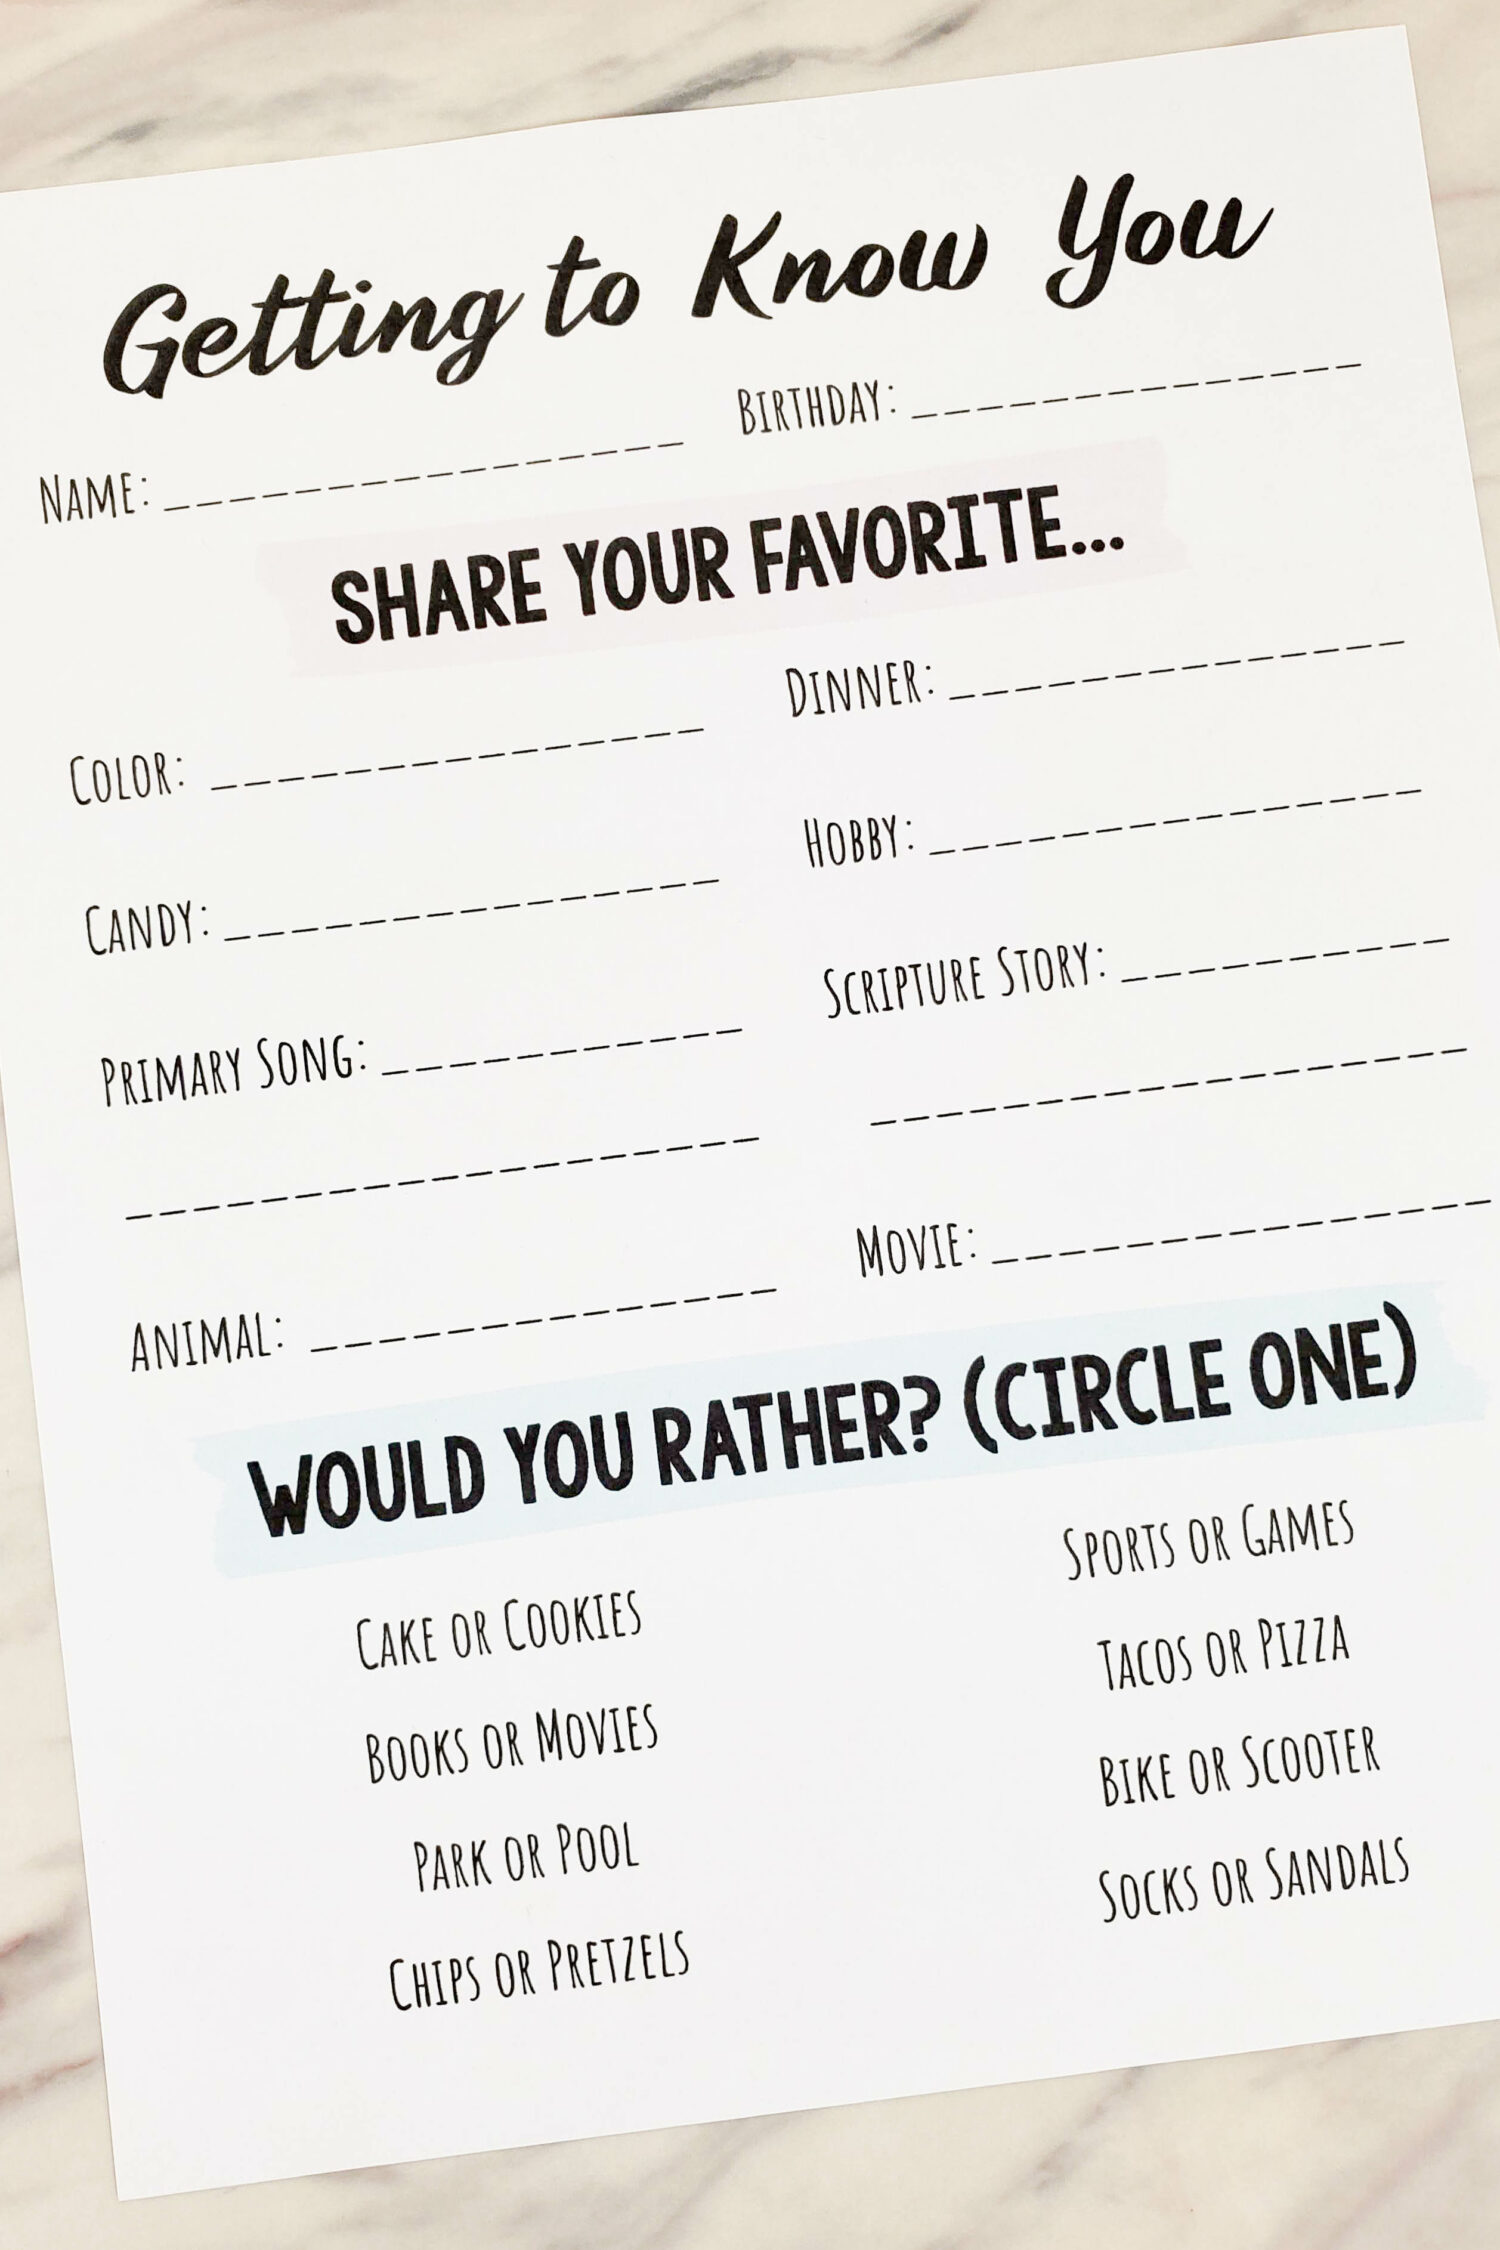 Getting to Know You Printable Survey - Fun questionnaire for LDS Primary Music Leaders or Come Follow Me for Primary Sunday School teachers! Includes a section for them to fill-in their favorites and then a section to pick which they prefer in a would you rather game! Easy ideas to use this in singing time as well.